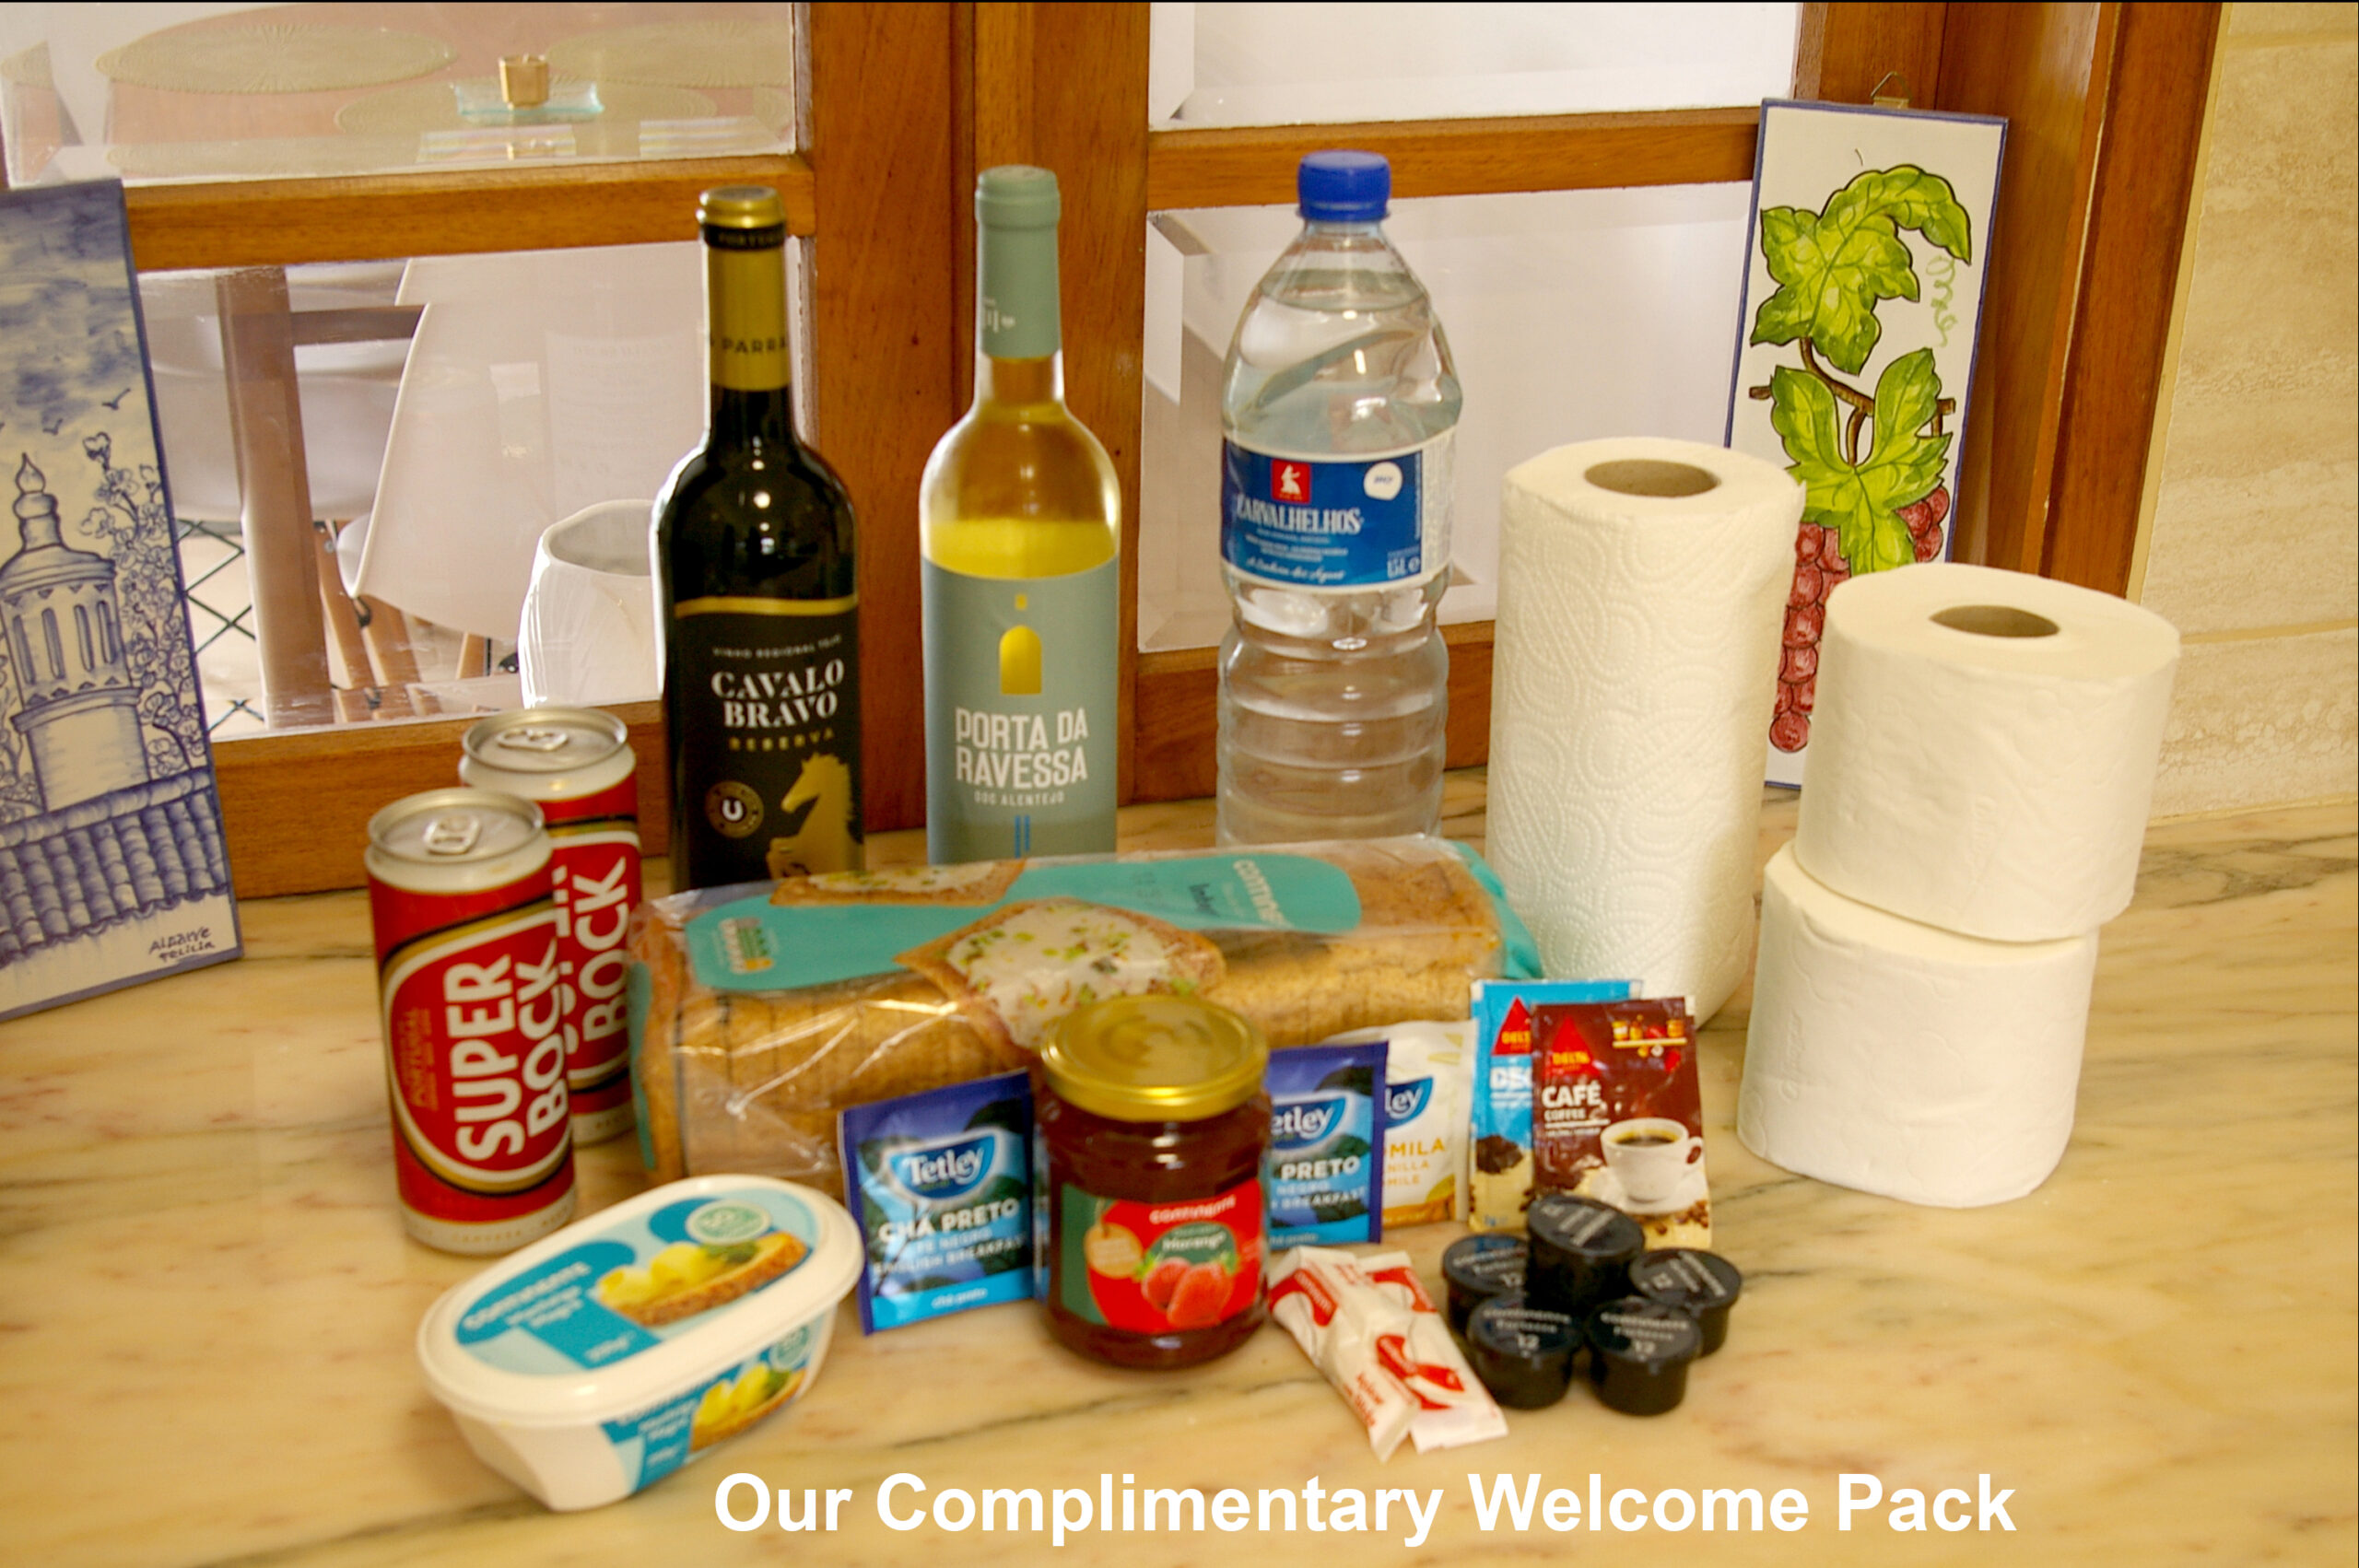 Our Complimentary Welcome Pack gets you off to a great start